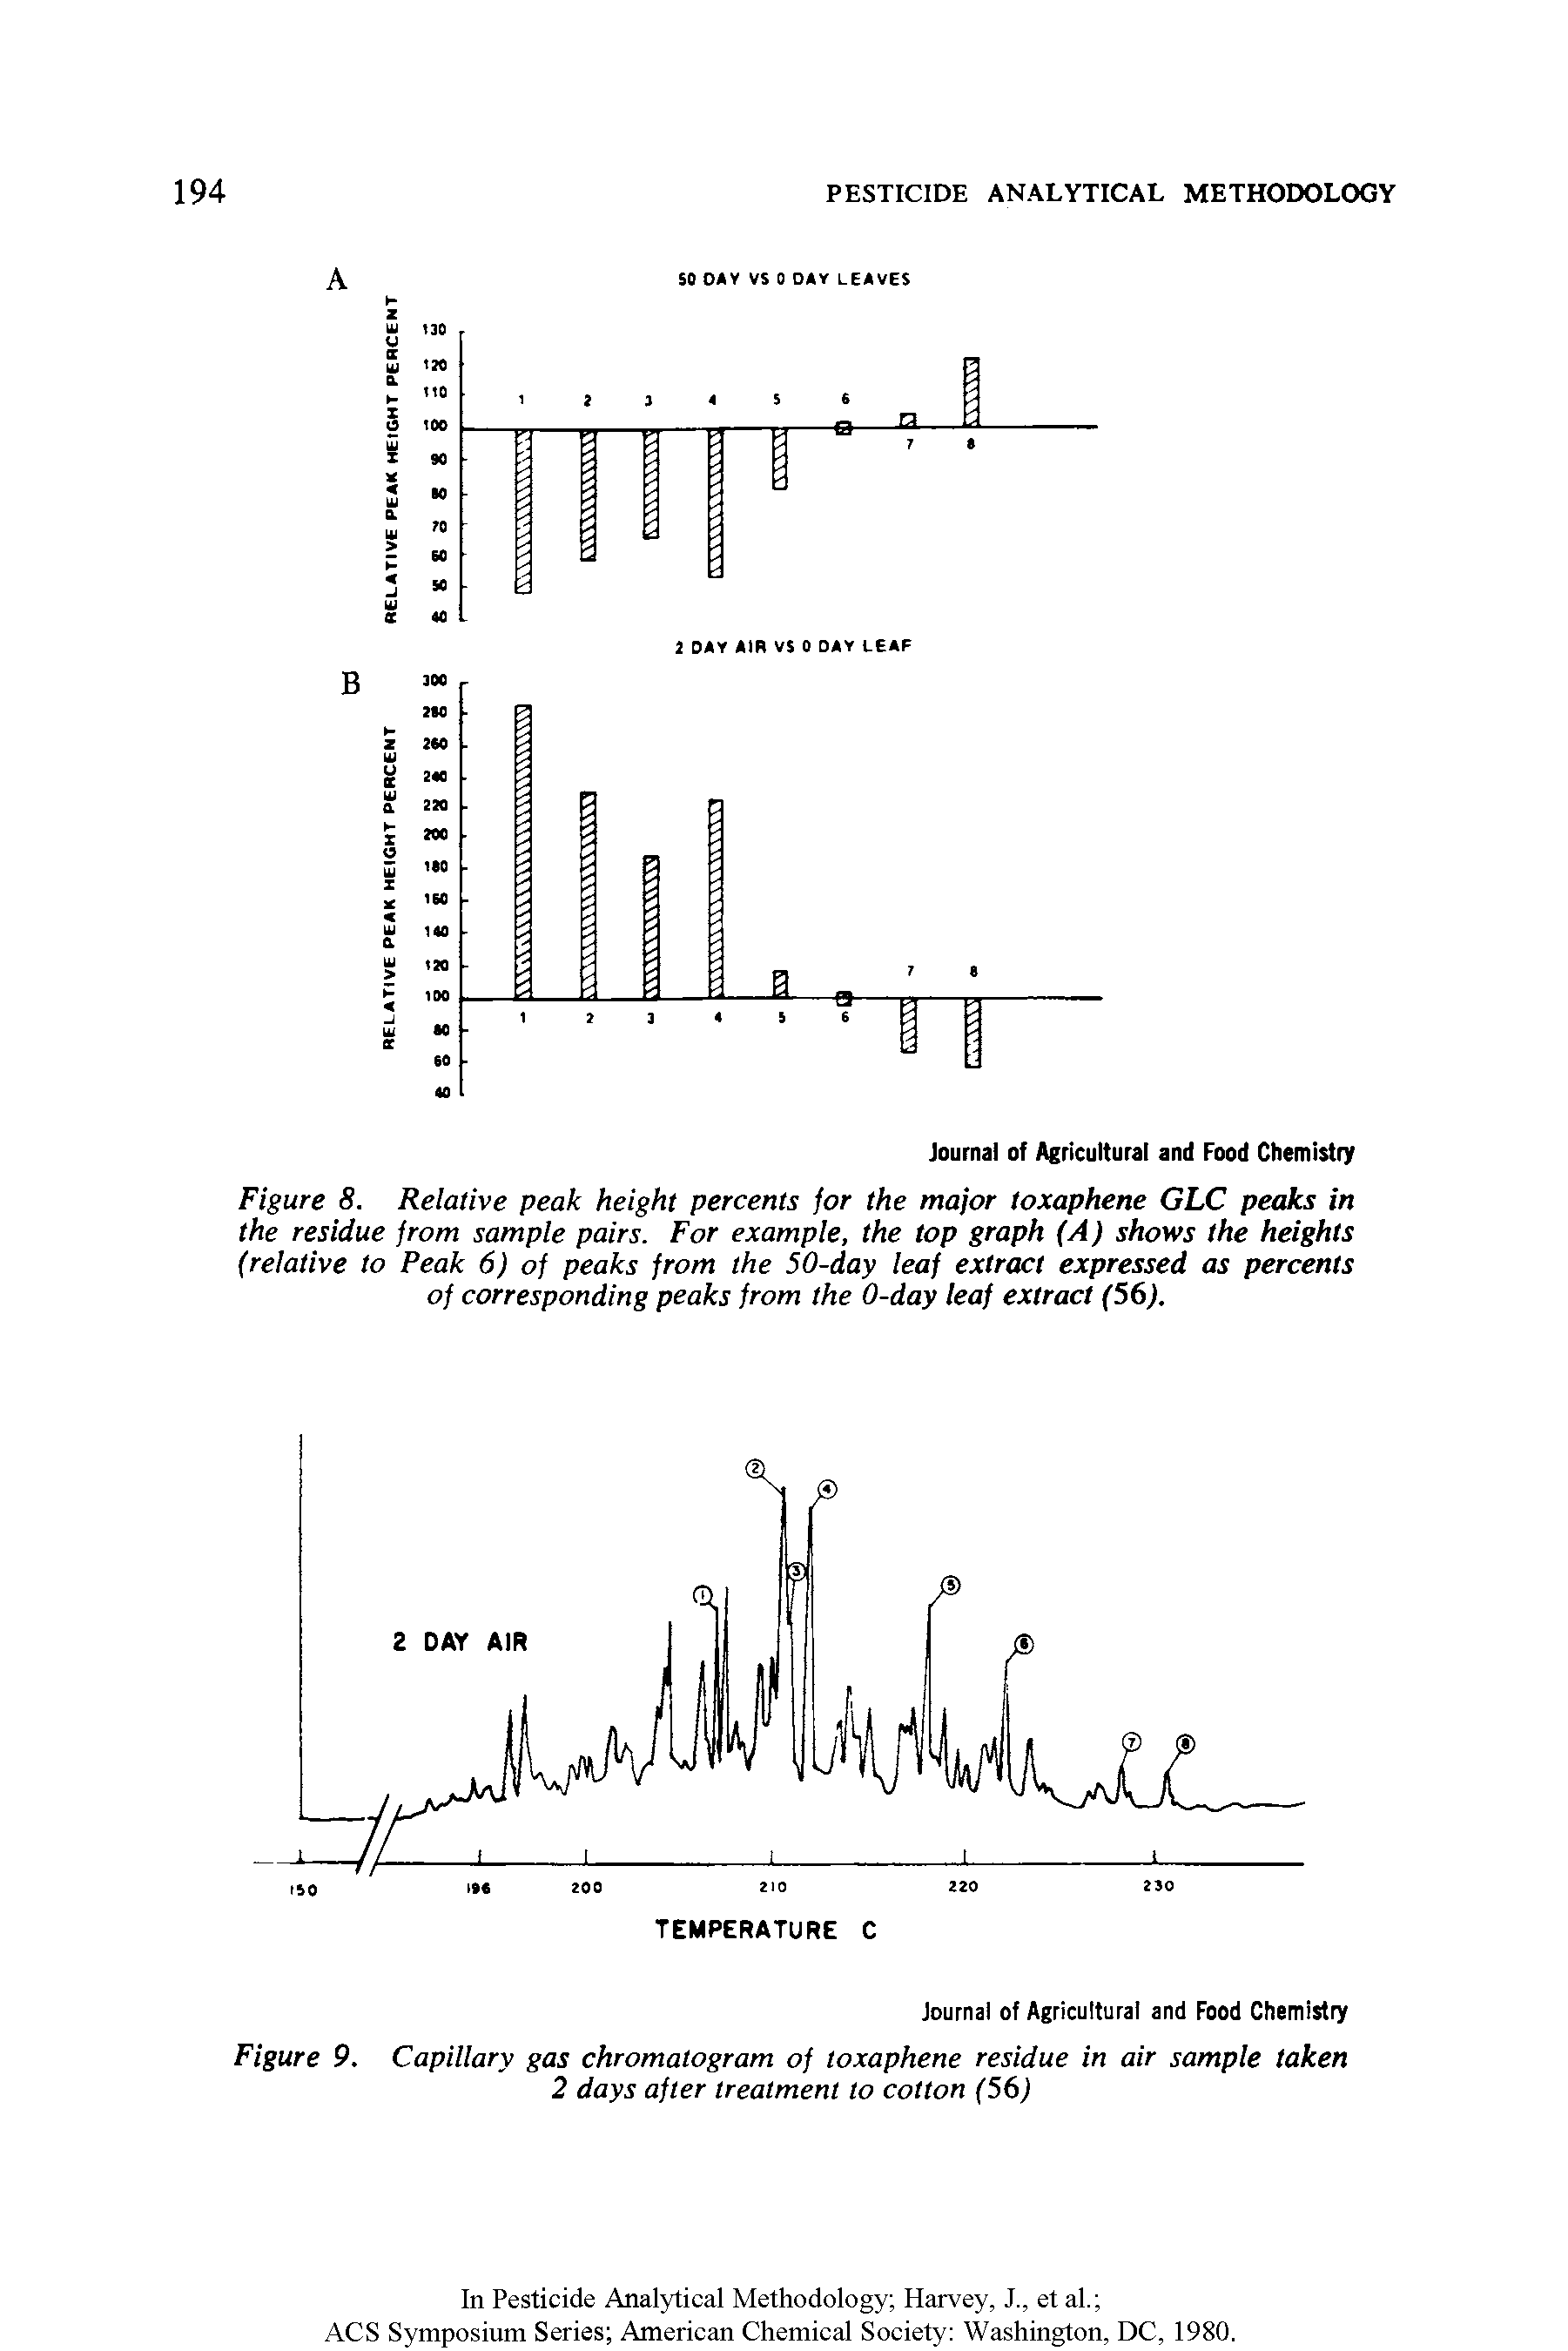 Figure 8. Relative peak height percents for the major toxaphene GLC peaks in the residue jrom sample pairs. For example, the top graph (A) shows the heights (relative to Peak 6) of peaks from the 50-day leaf extract expressed as percents of corresponding peaks from the 0-day leaf extract (56).